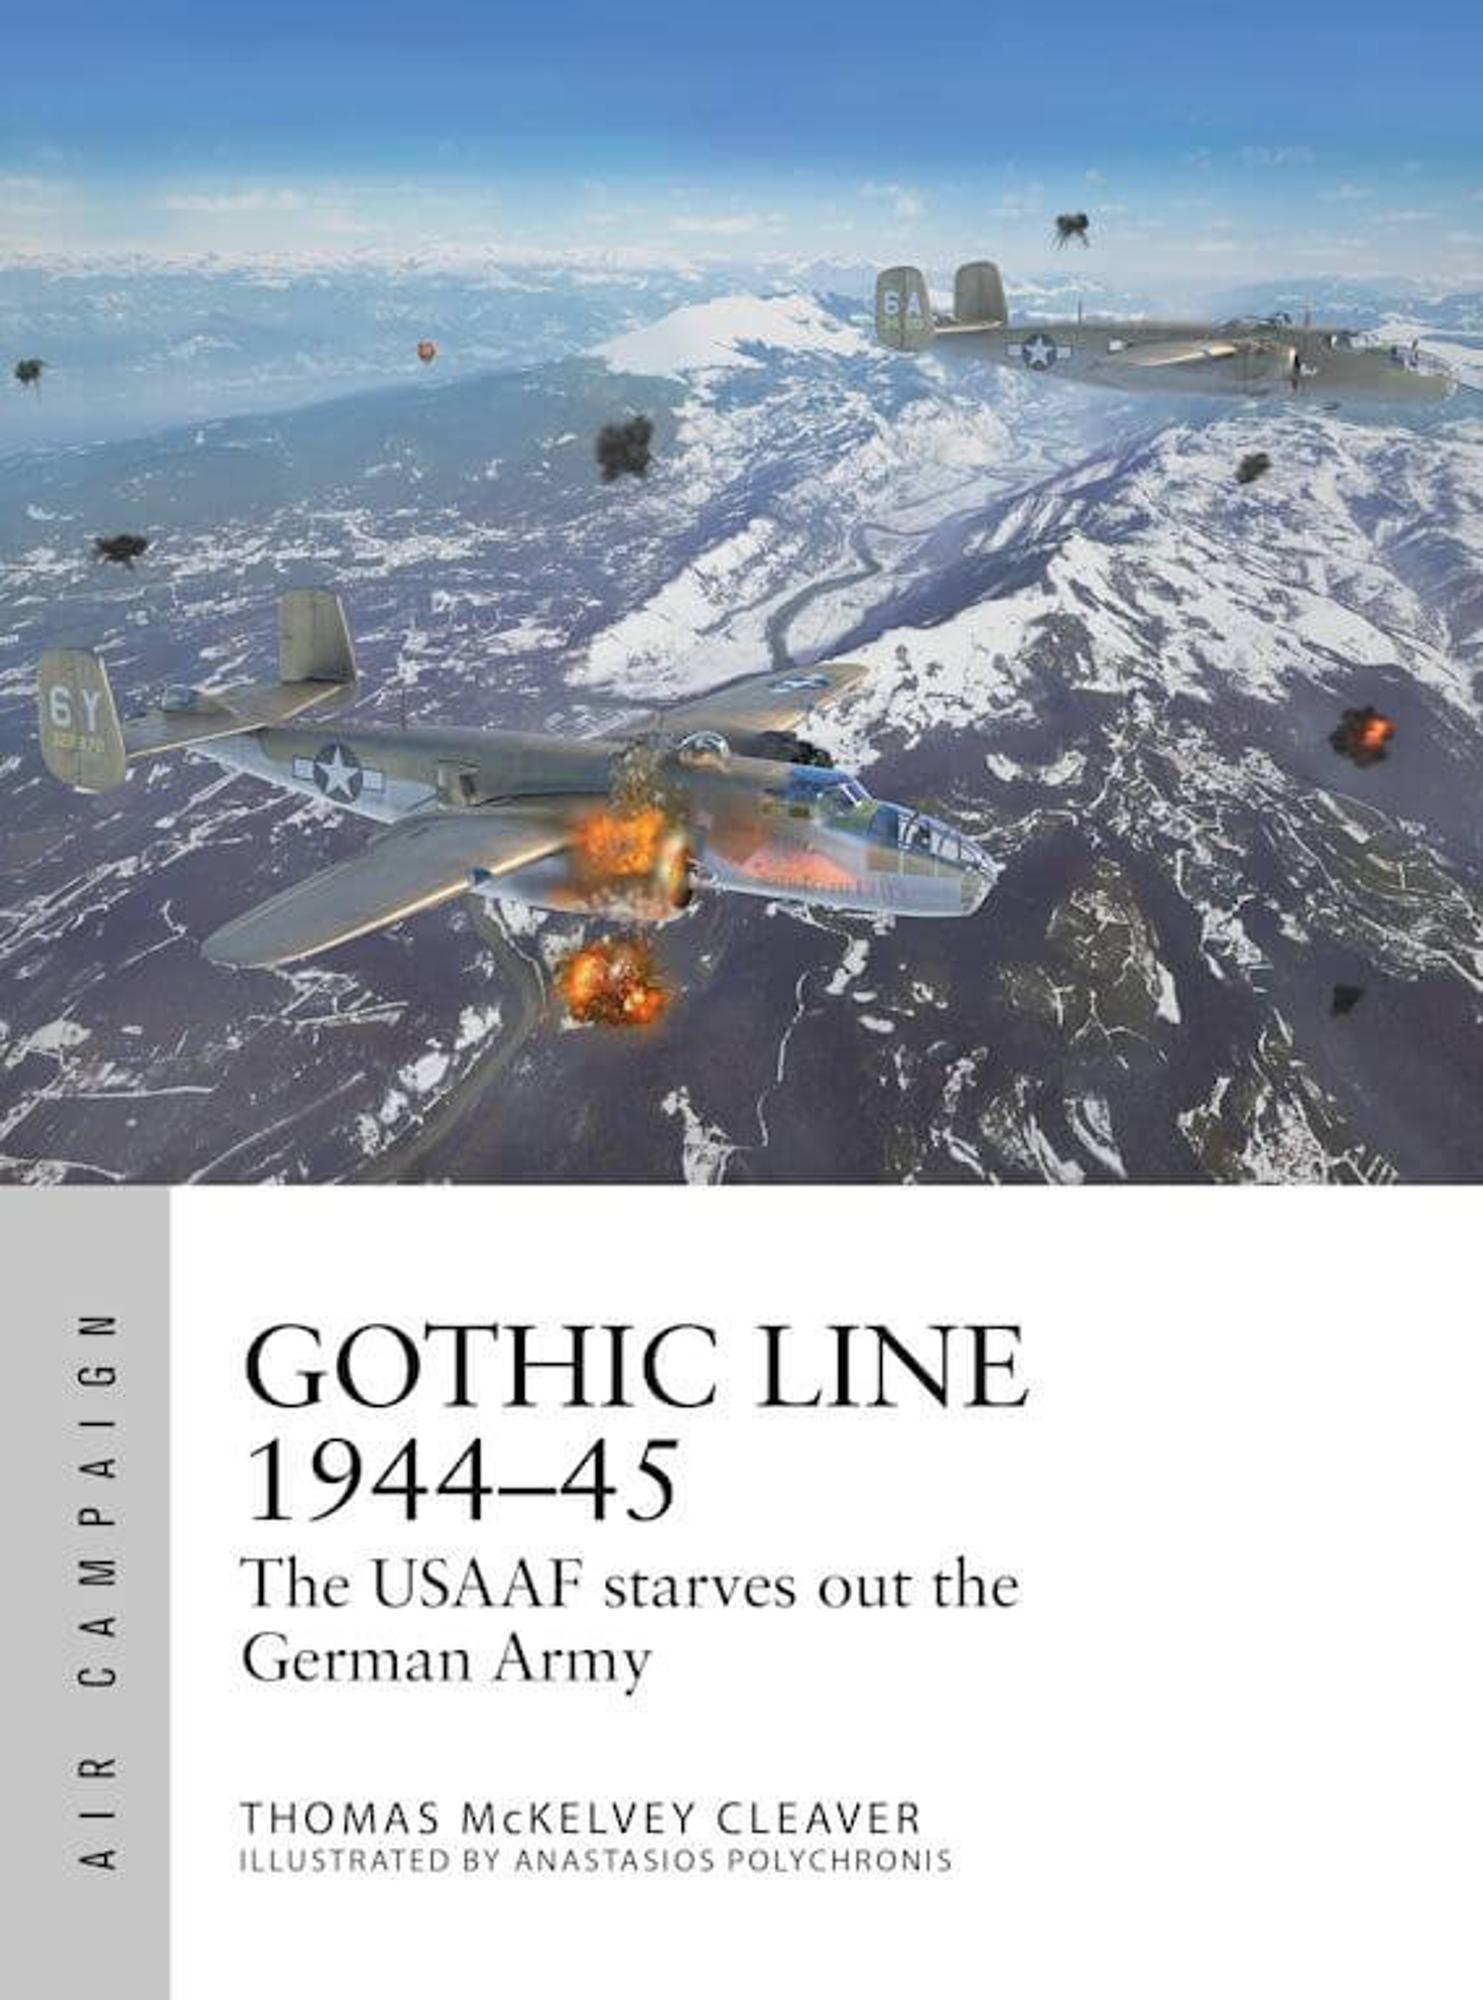 Gothic Line 1944-45: The USAAF starves out the German Army